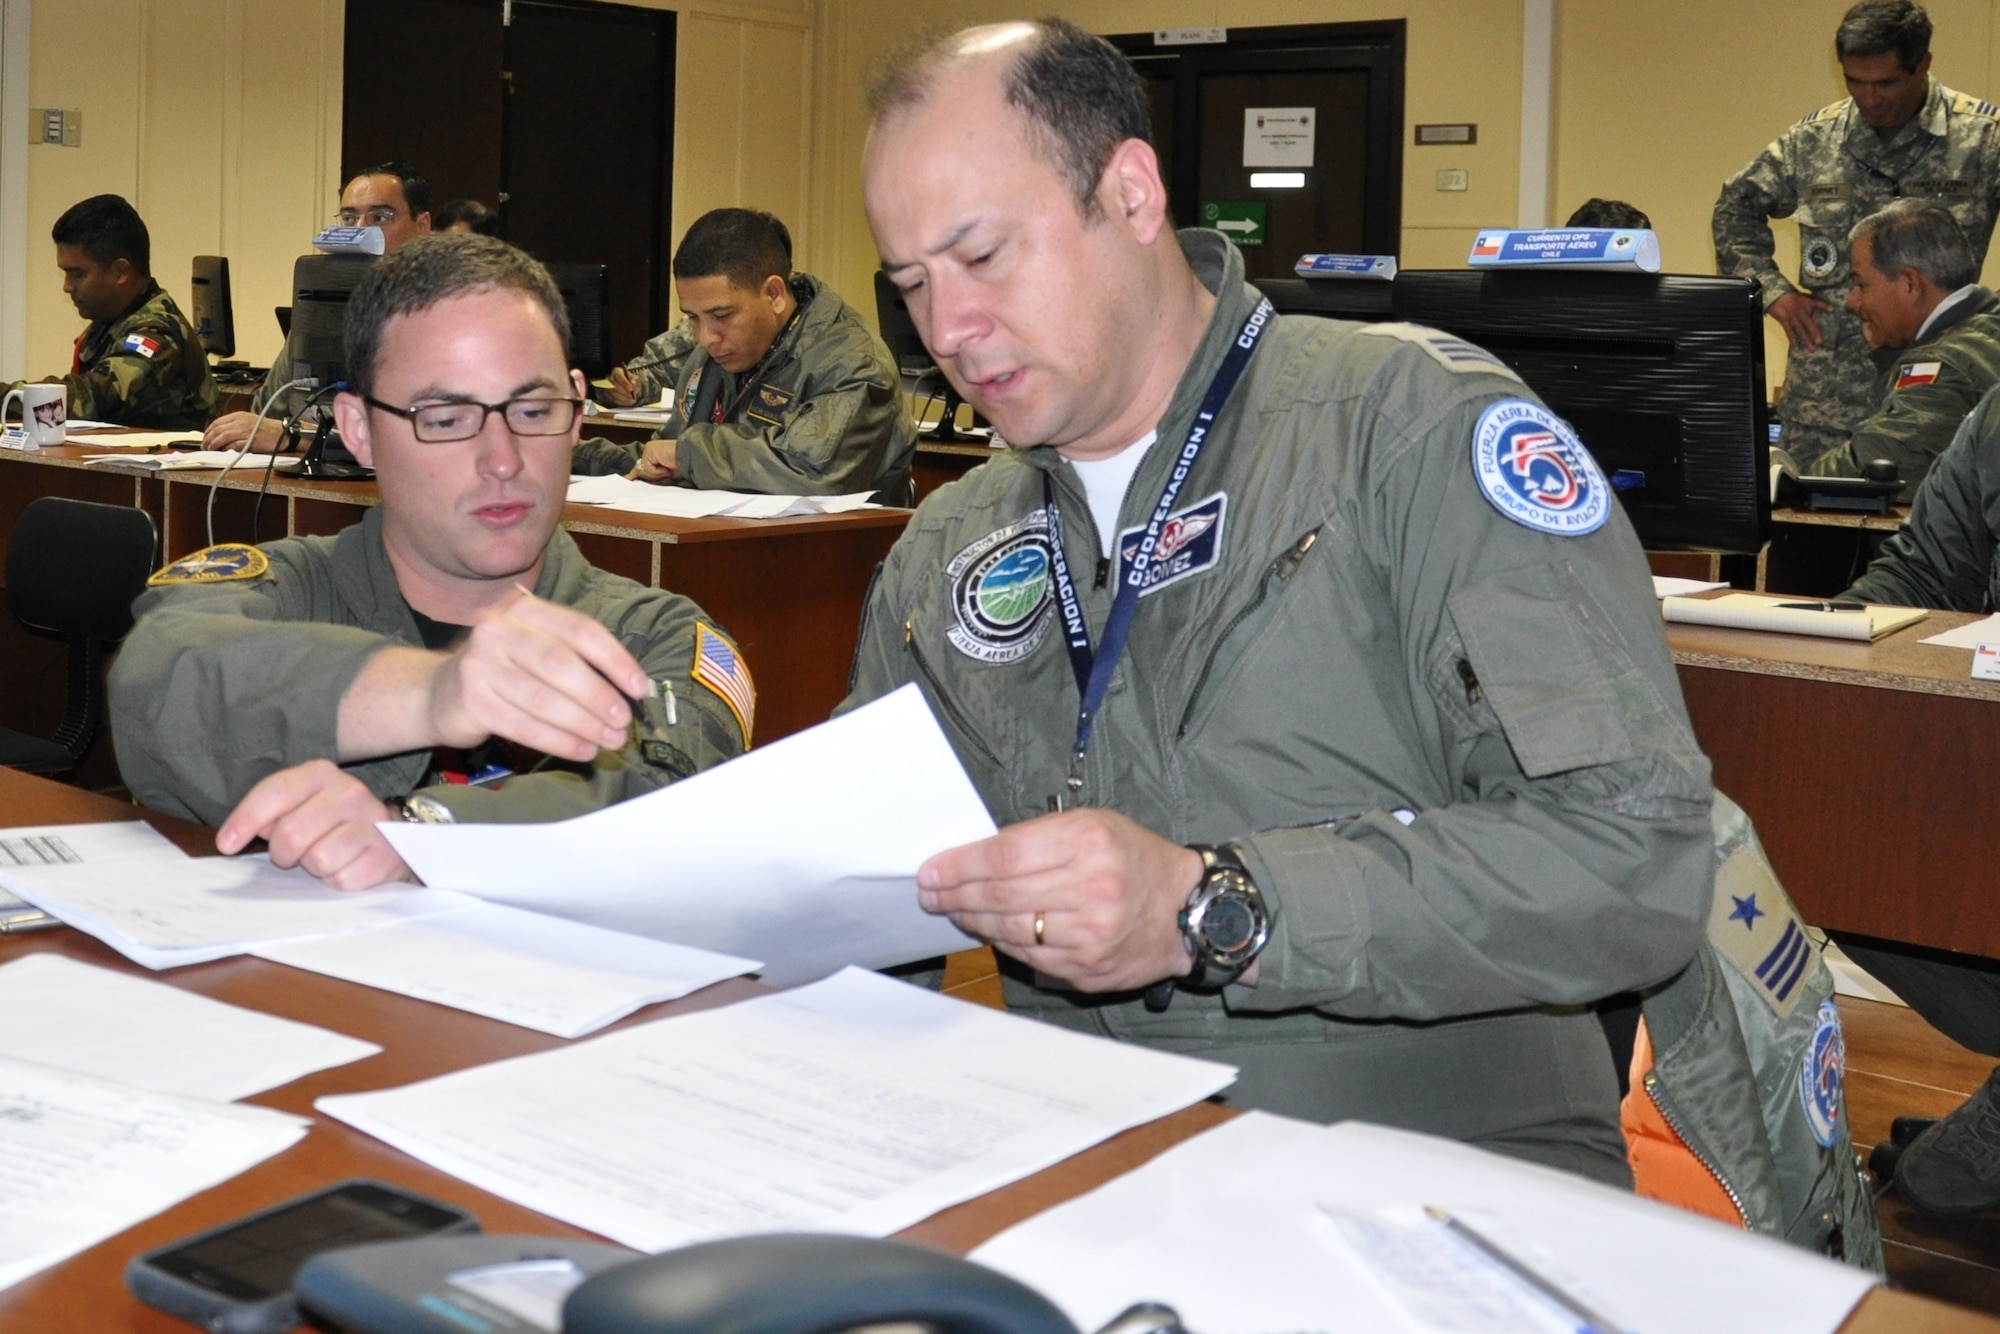 1st. Lt. William Holland, a pilot with the 136th Airlift Wing, Texas Air National Guard, coordinates U.S. air support and the movement of cargo in a Combined Air Operations Center created specifically for a SICOFAA exercise, (Sistema de cooperacion de las Fuerzas Aerias de las Americas) Cooperation 1 headquartered in Puerto Montt, Chile, Oct. 4 to 14. The exercise scenario involved using the air forces of SICOFAA member nations for humanitarian assistance after a natural disaster (U.S. Air Force photo/Capt. Rebecca A. Garcia).